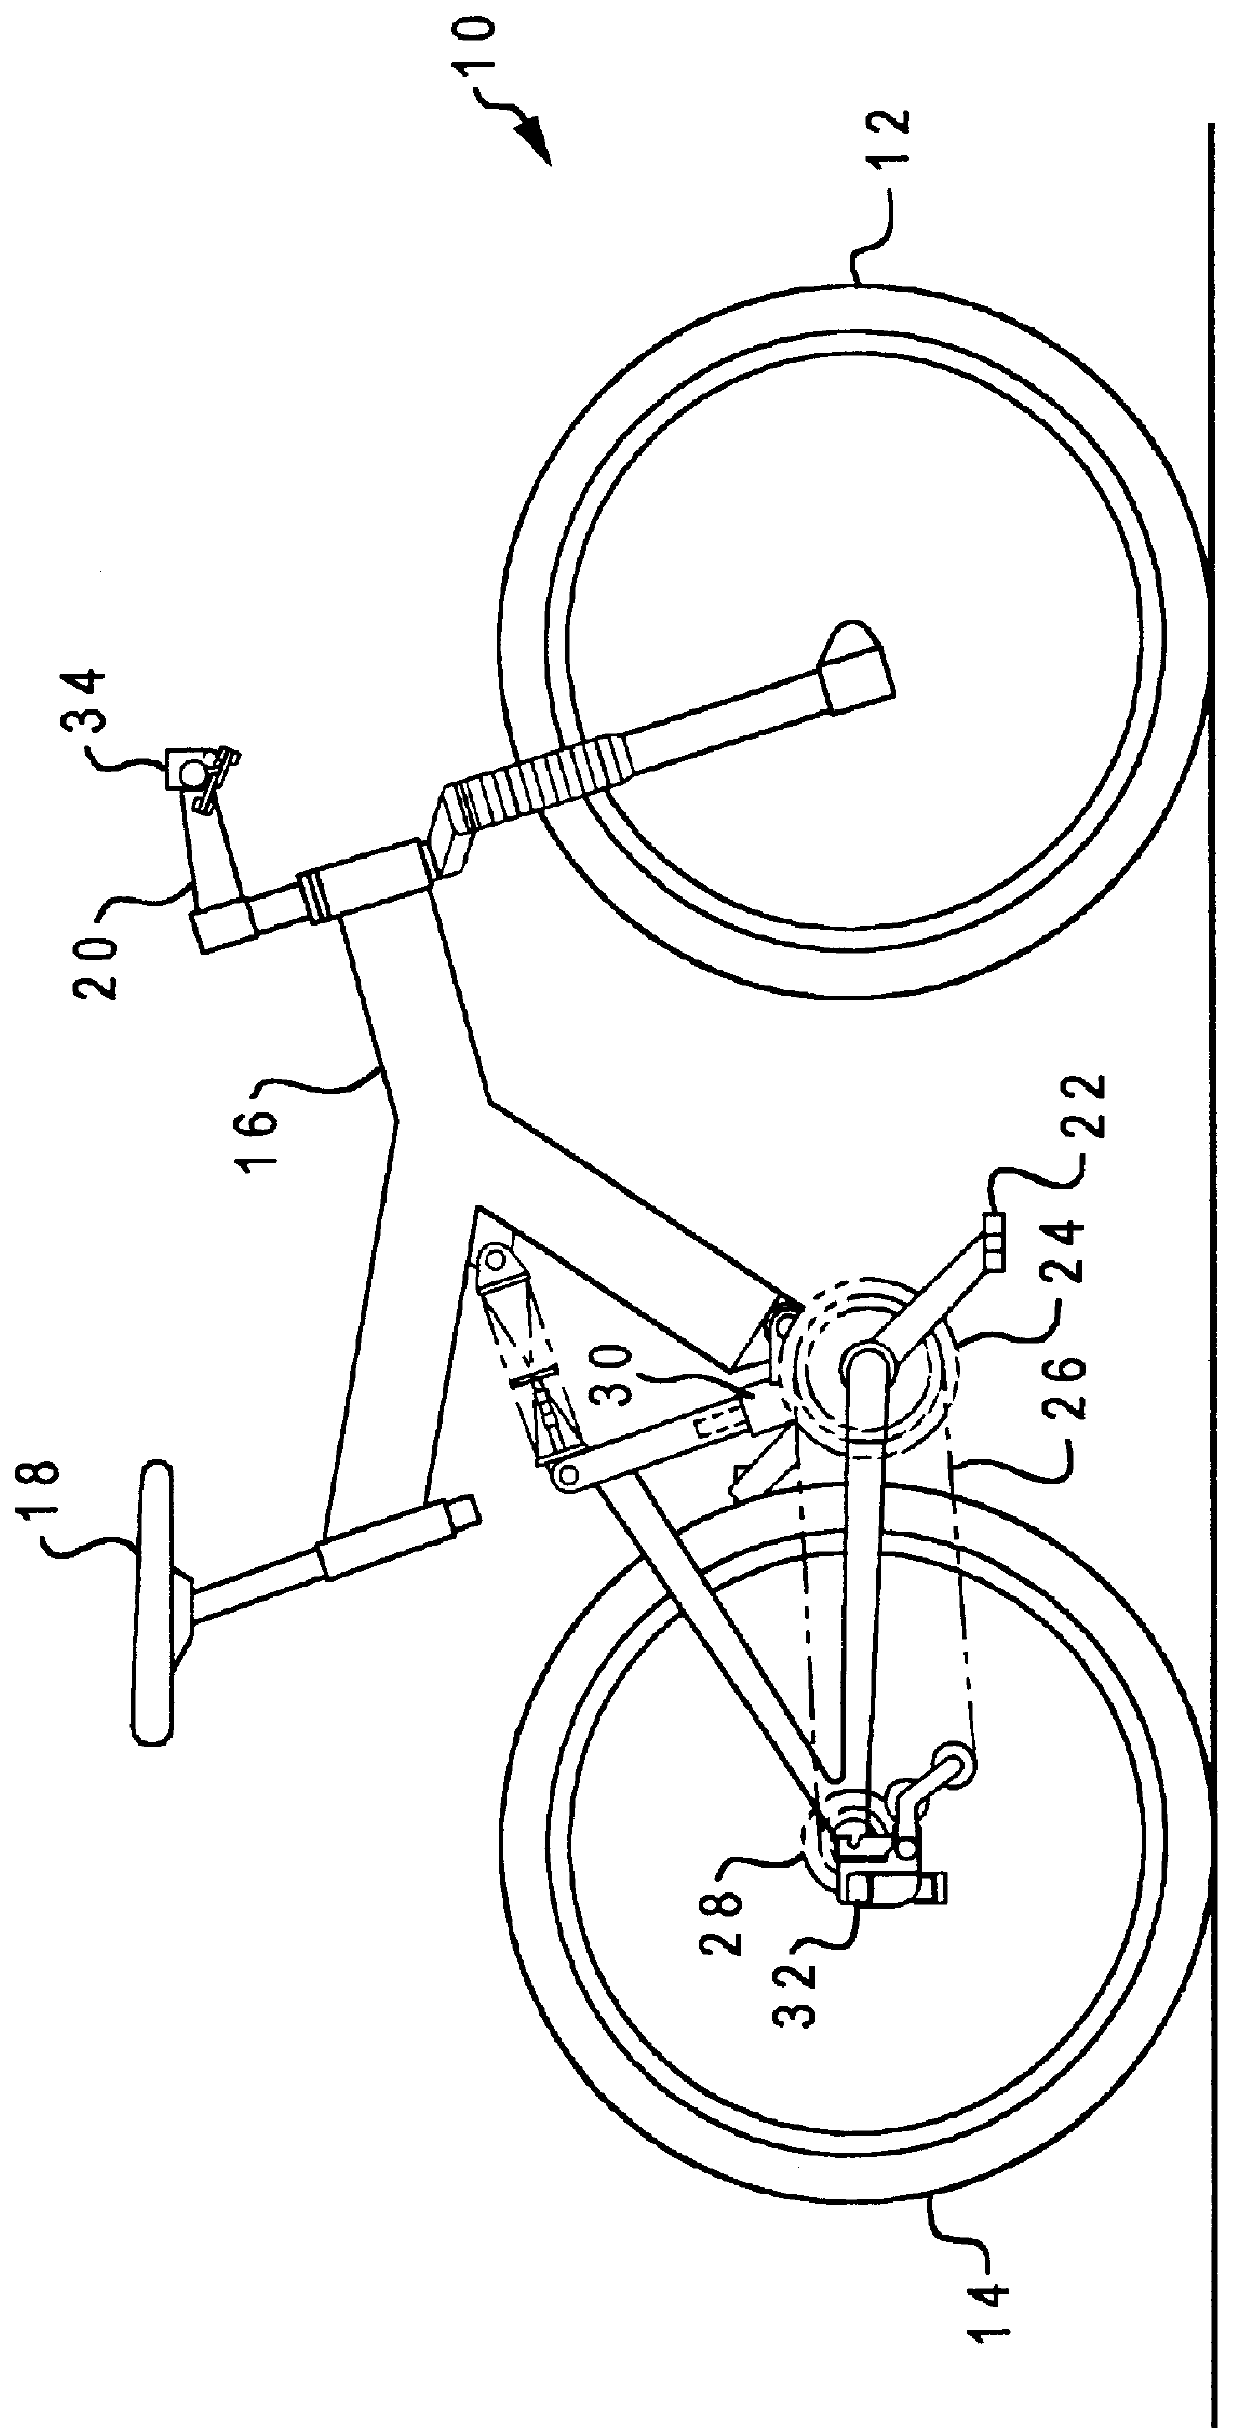 Hydraulically-operated bicycle shifting and braking systems